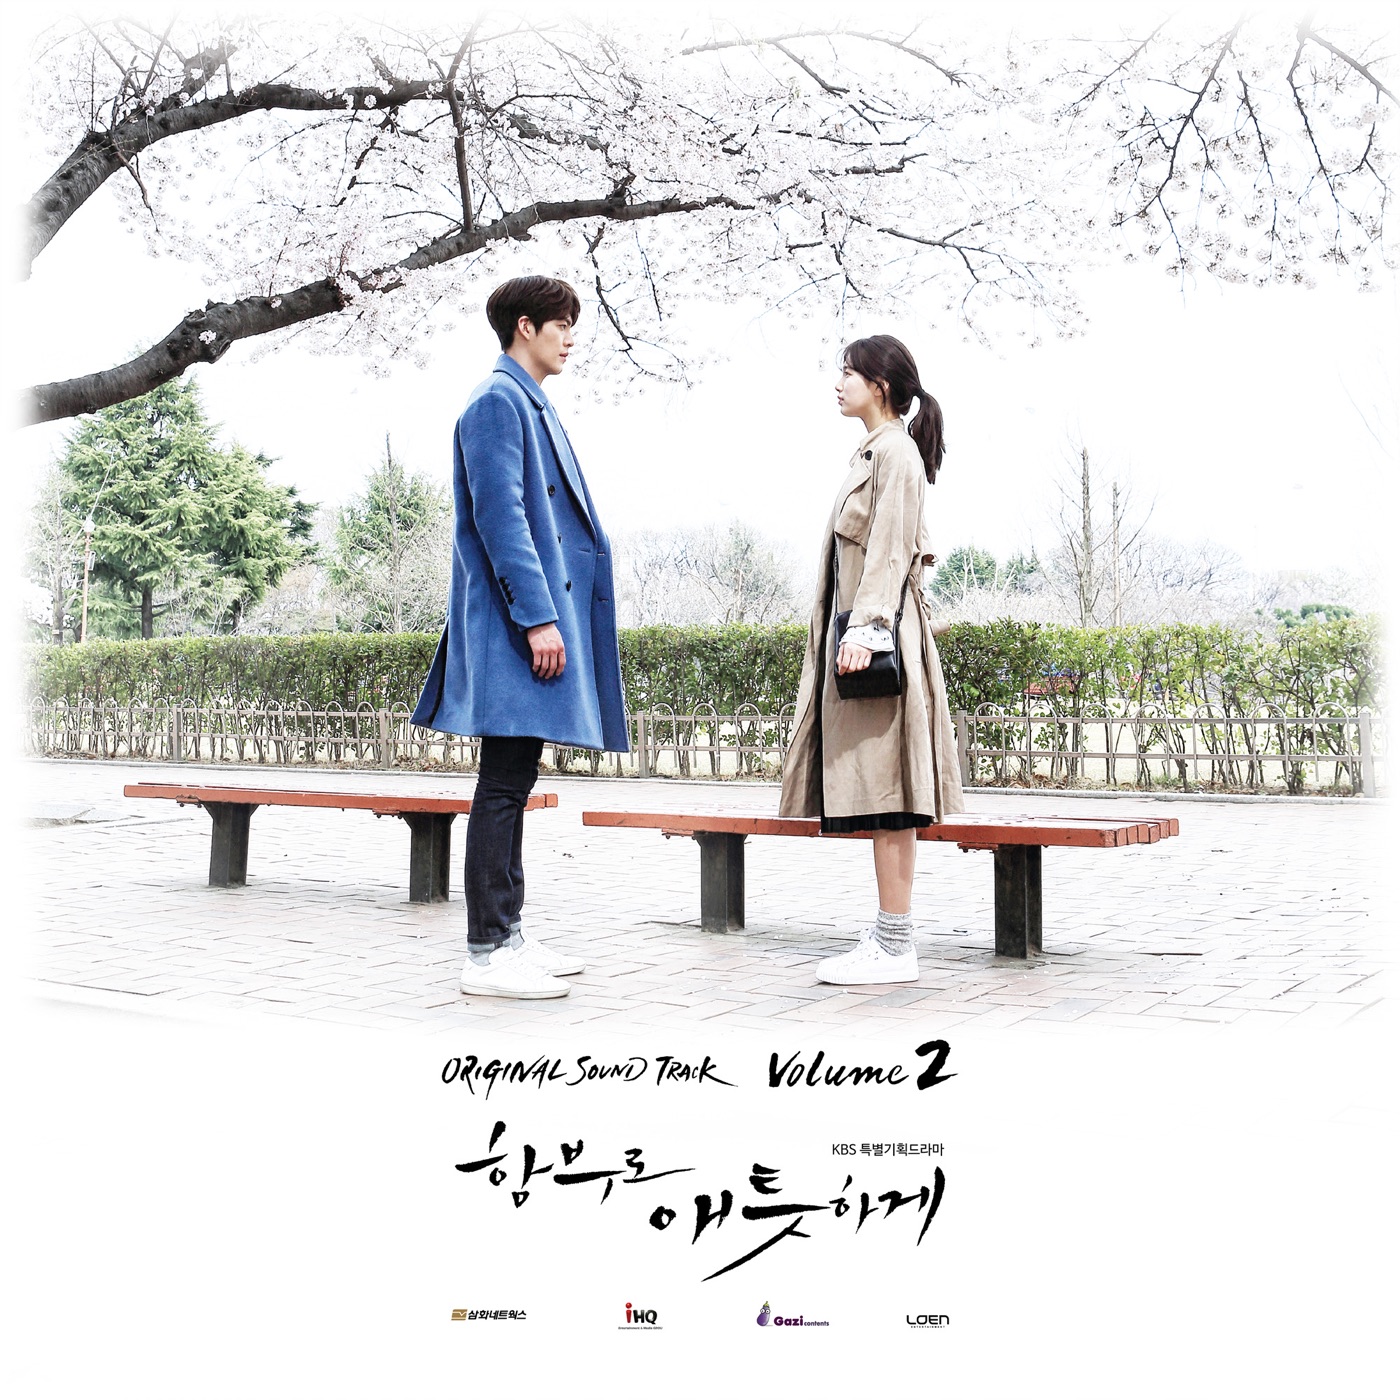 Uncontrollably Fond (Original Television Soundtrack), Vol. 2 by Various Artists